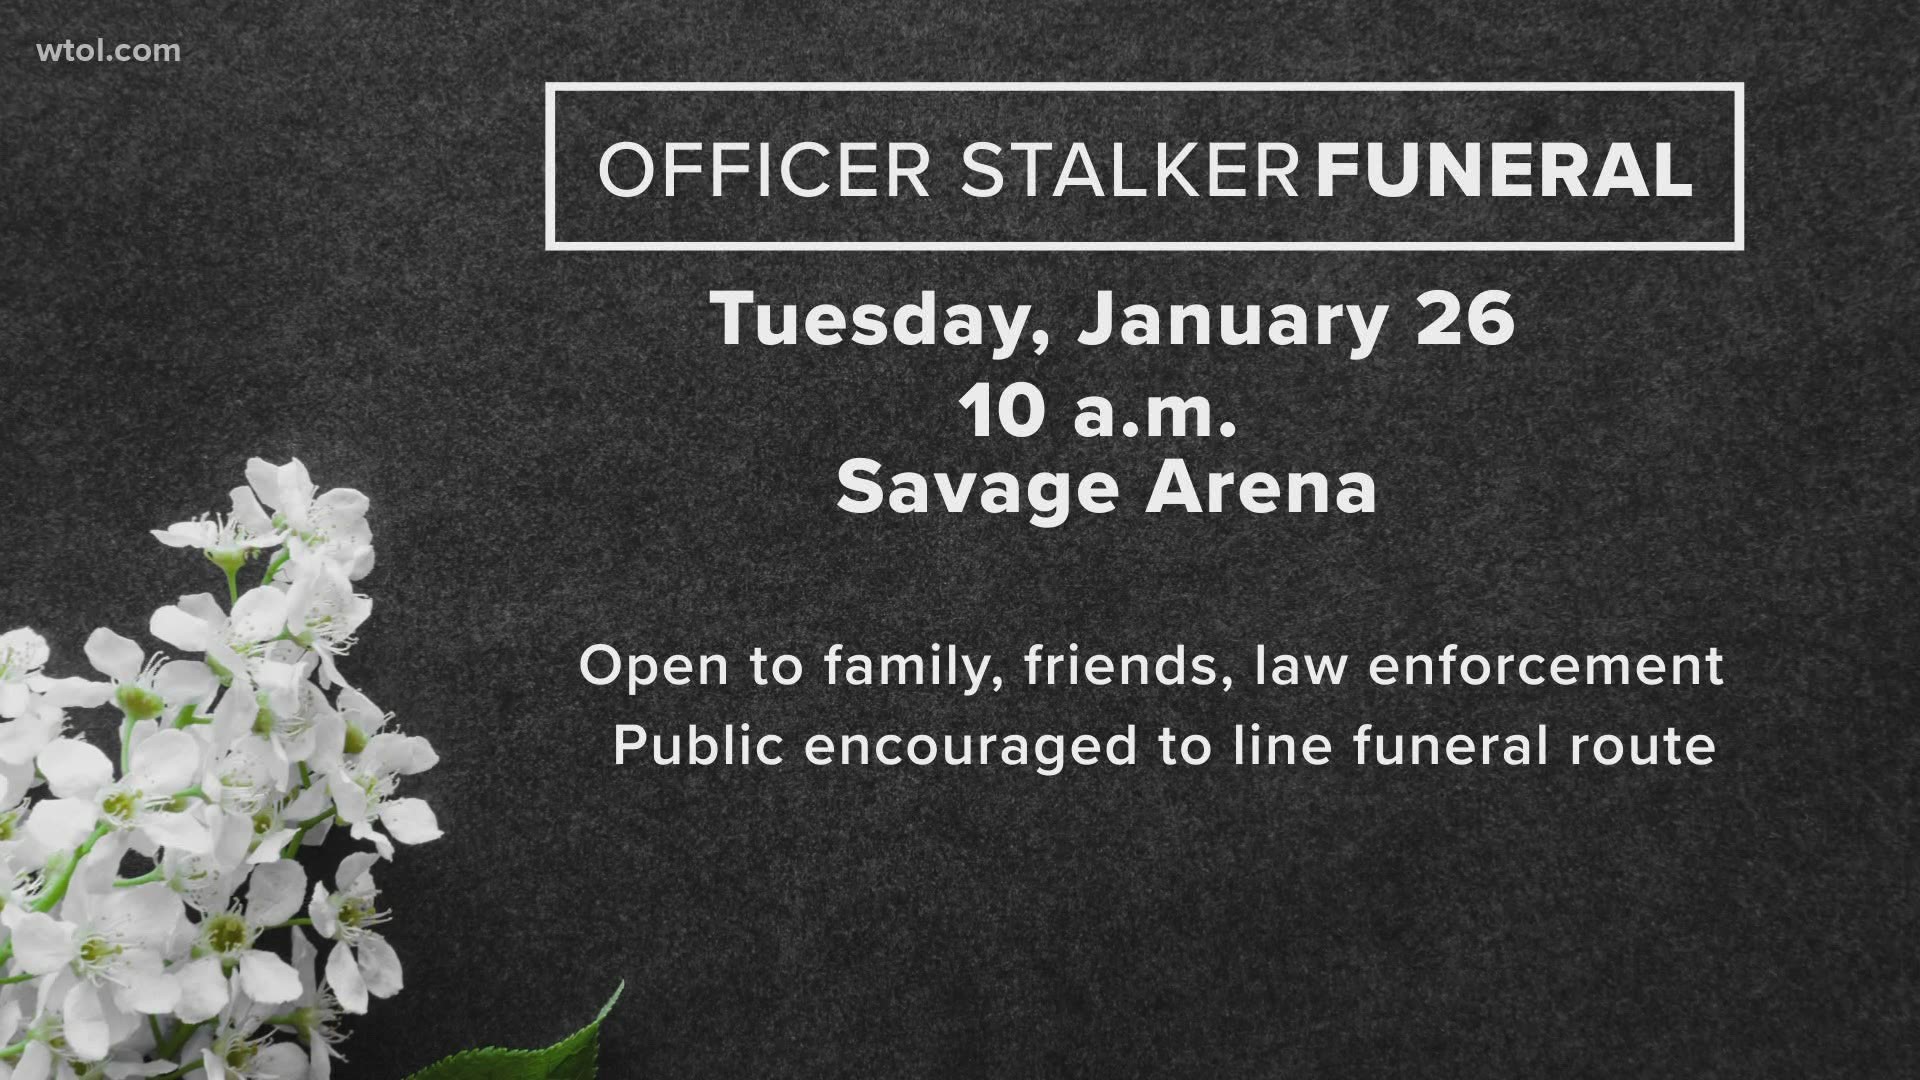 The funeral to honor Officer Stalker will be on Tuesday, January 26th at 10 a.m. at Savage Arena and is open to family and friends and law enforcement only.